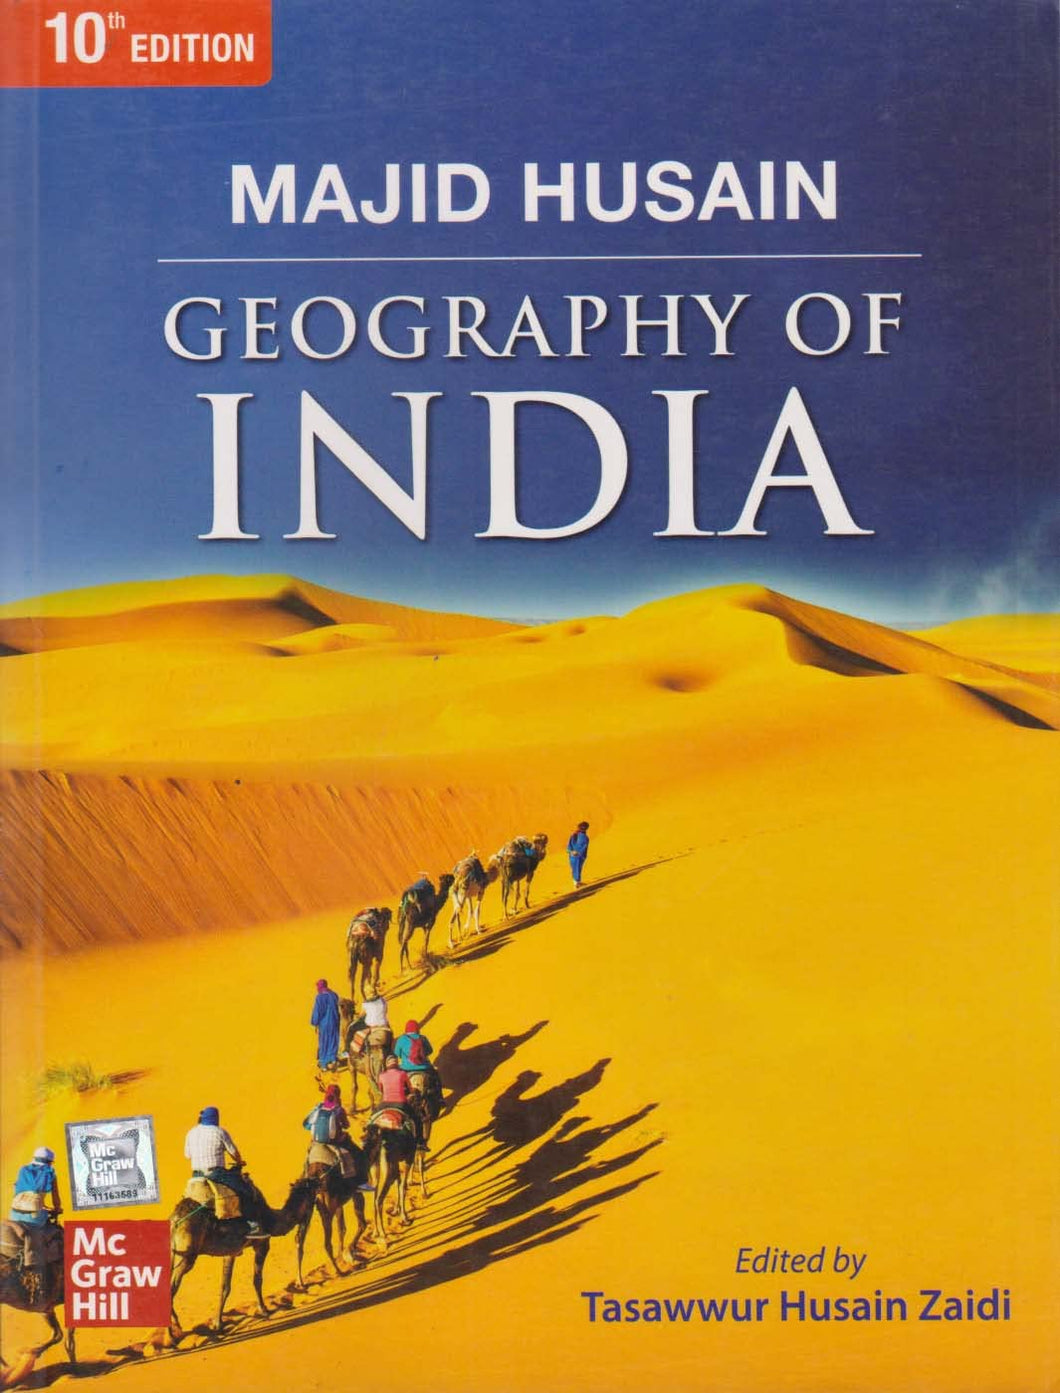 Geography of india - 10th Edition by Majid Husain